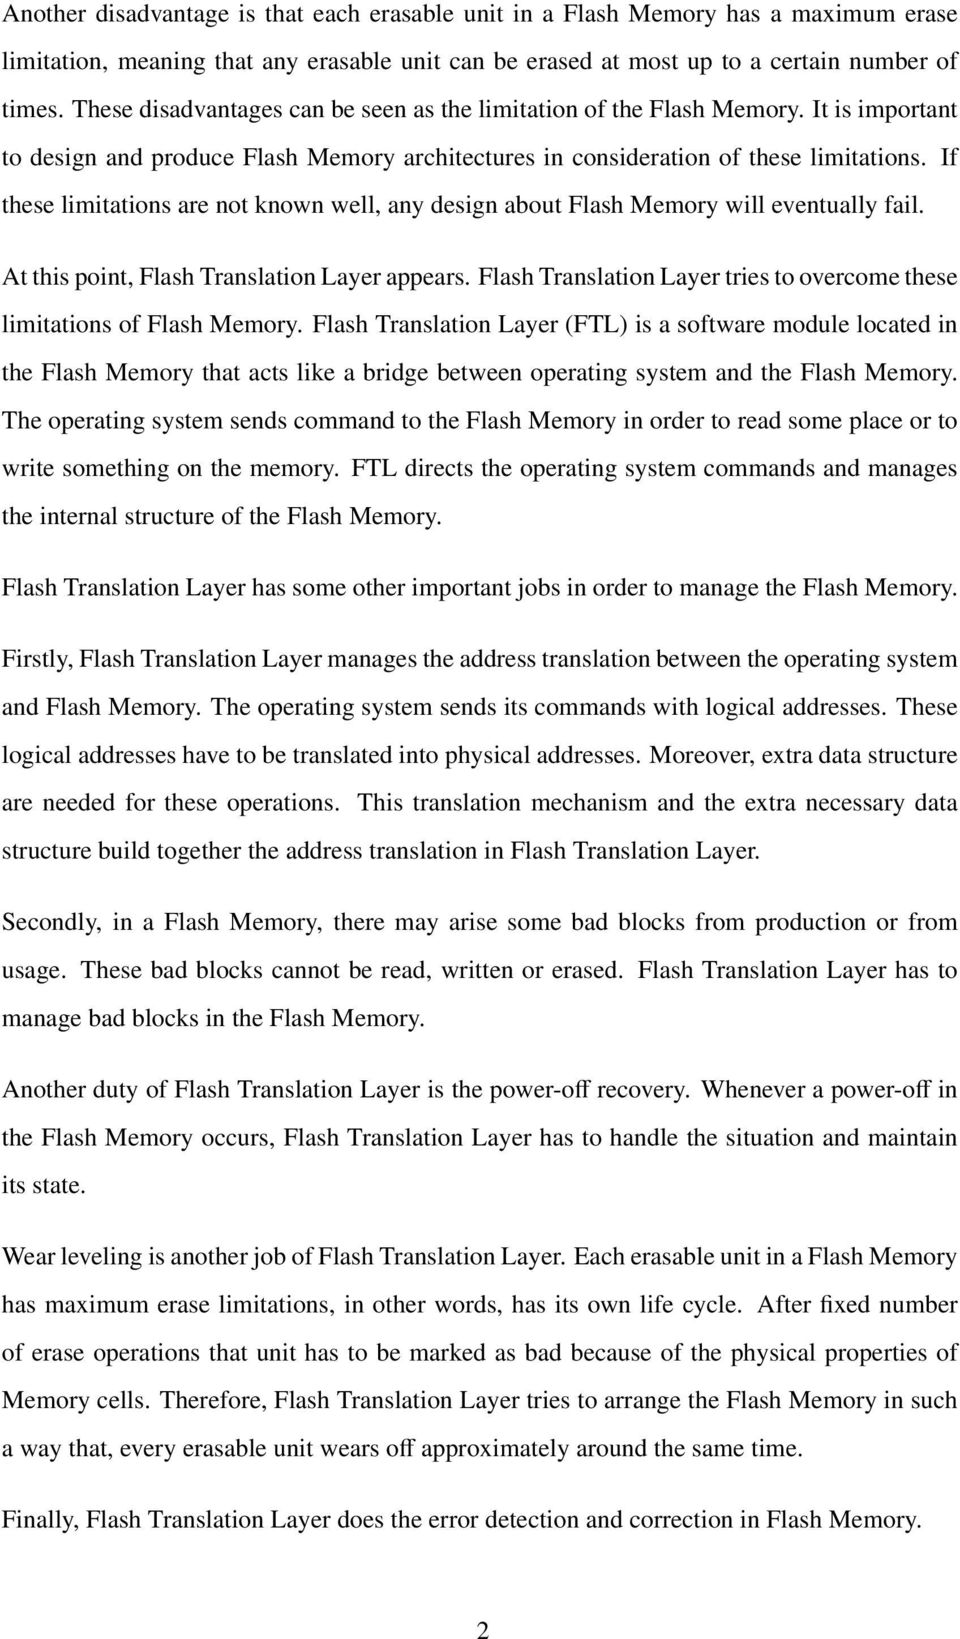 If these limitations are not known well, any design about Flash Memory will eventually fail. At this point, Flash Translation Layer appears.